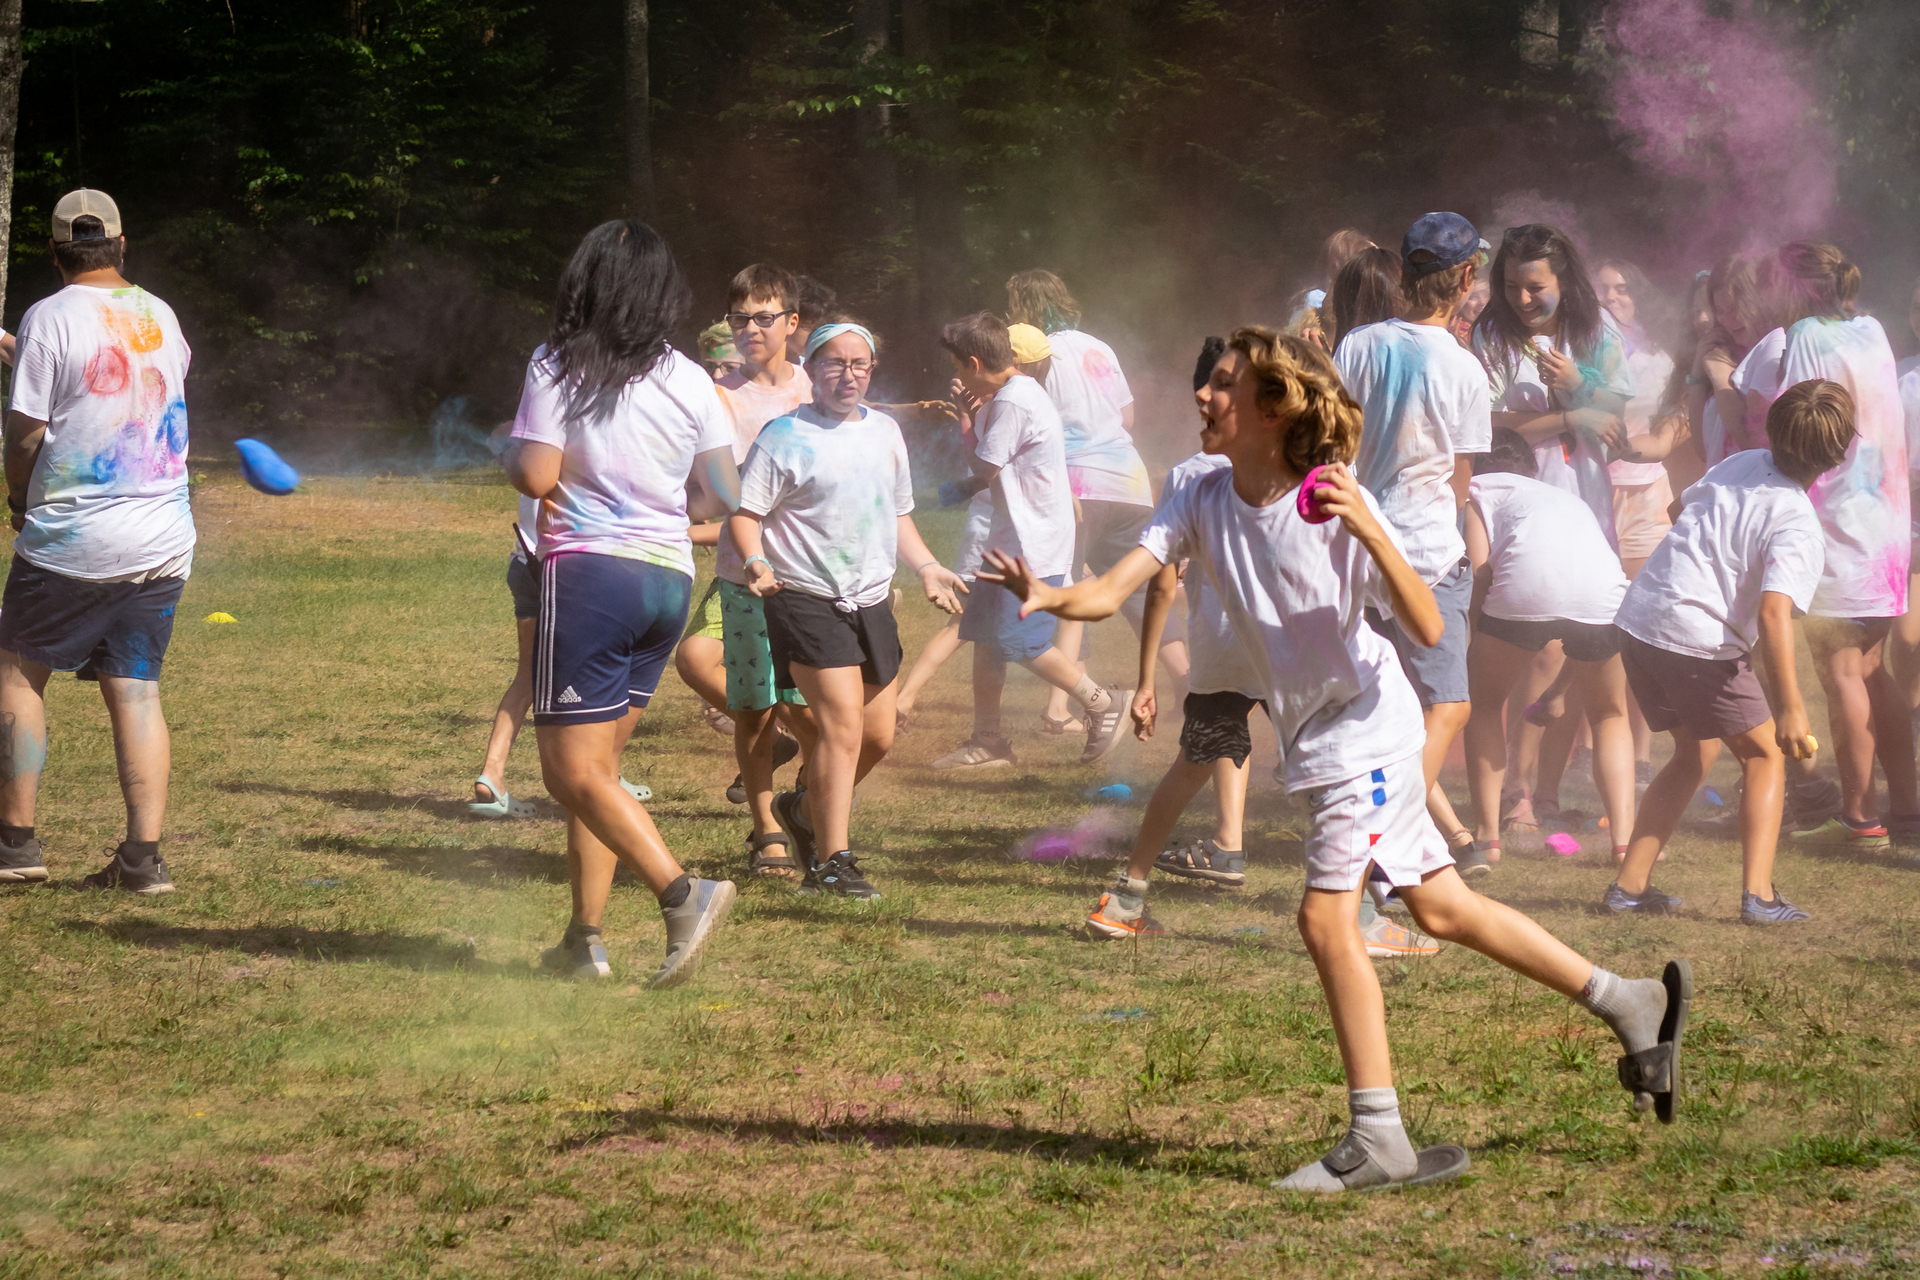 campers in white shirts throwing color on each other